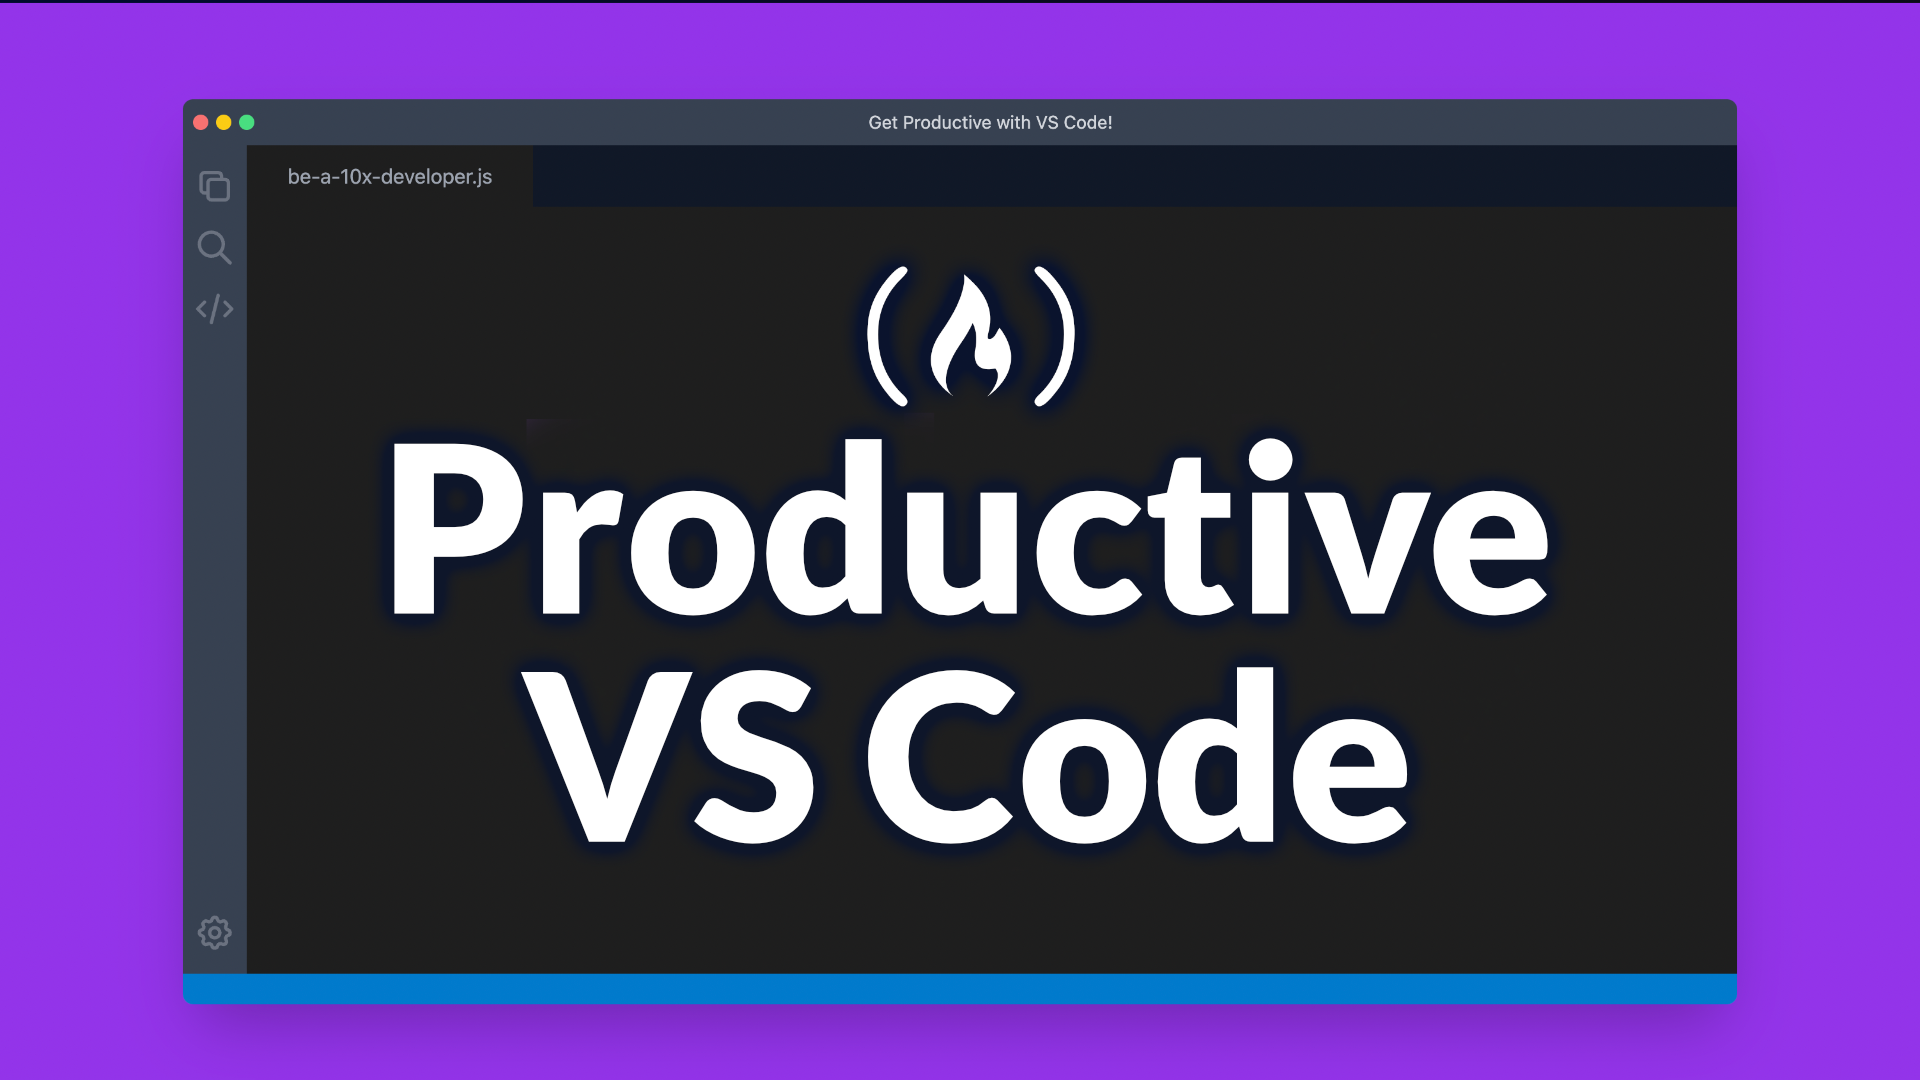 Increase Your VS Code Productivity